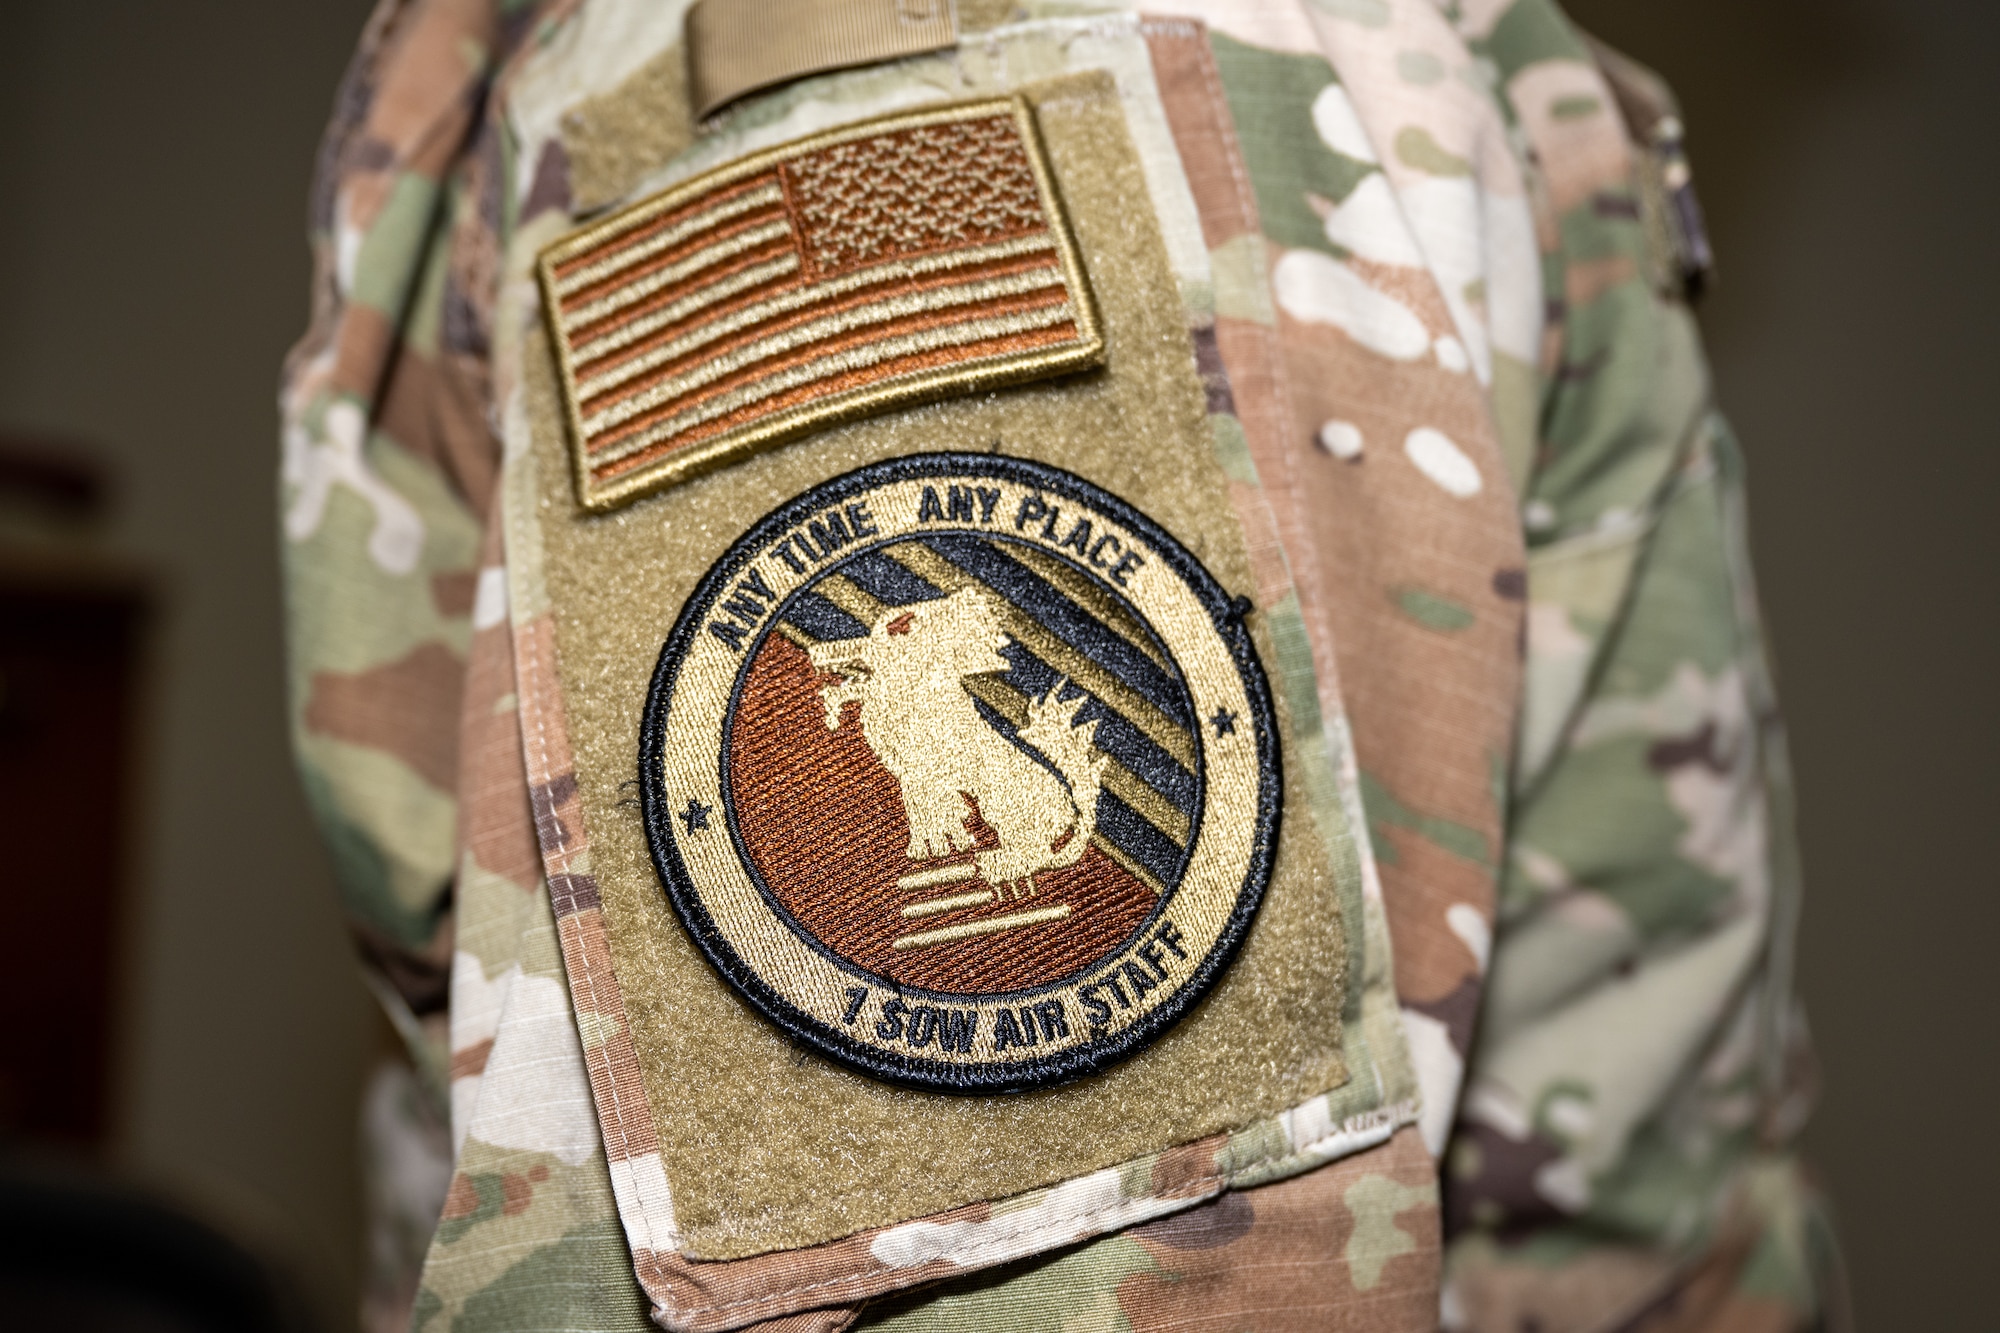 U.S. Air Force Senior Master Sgt. Stephan Boczar, 1st Special Operations Maintenance Squadron aircraft maintenance division chief, wears a 1st Special Operations Wing Air Staff patch at Hurlburt Field, Florida, Feb. 1, 2024. The patch refers to a standardized organizational structure used by the Air Force to describe different functions within an Air Force wing. (U.S. Air Force photo by Senior Airman Alysa Calvarese)